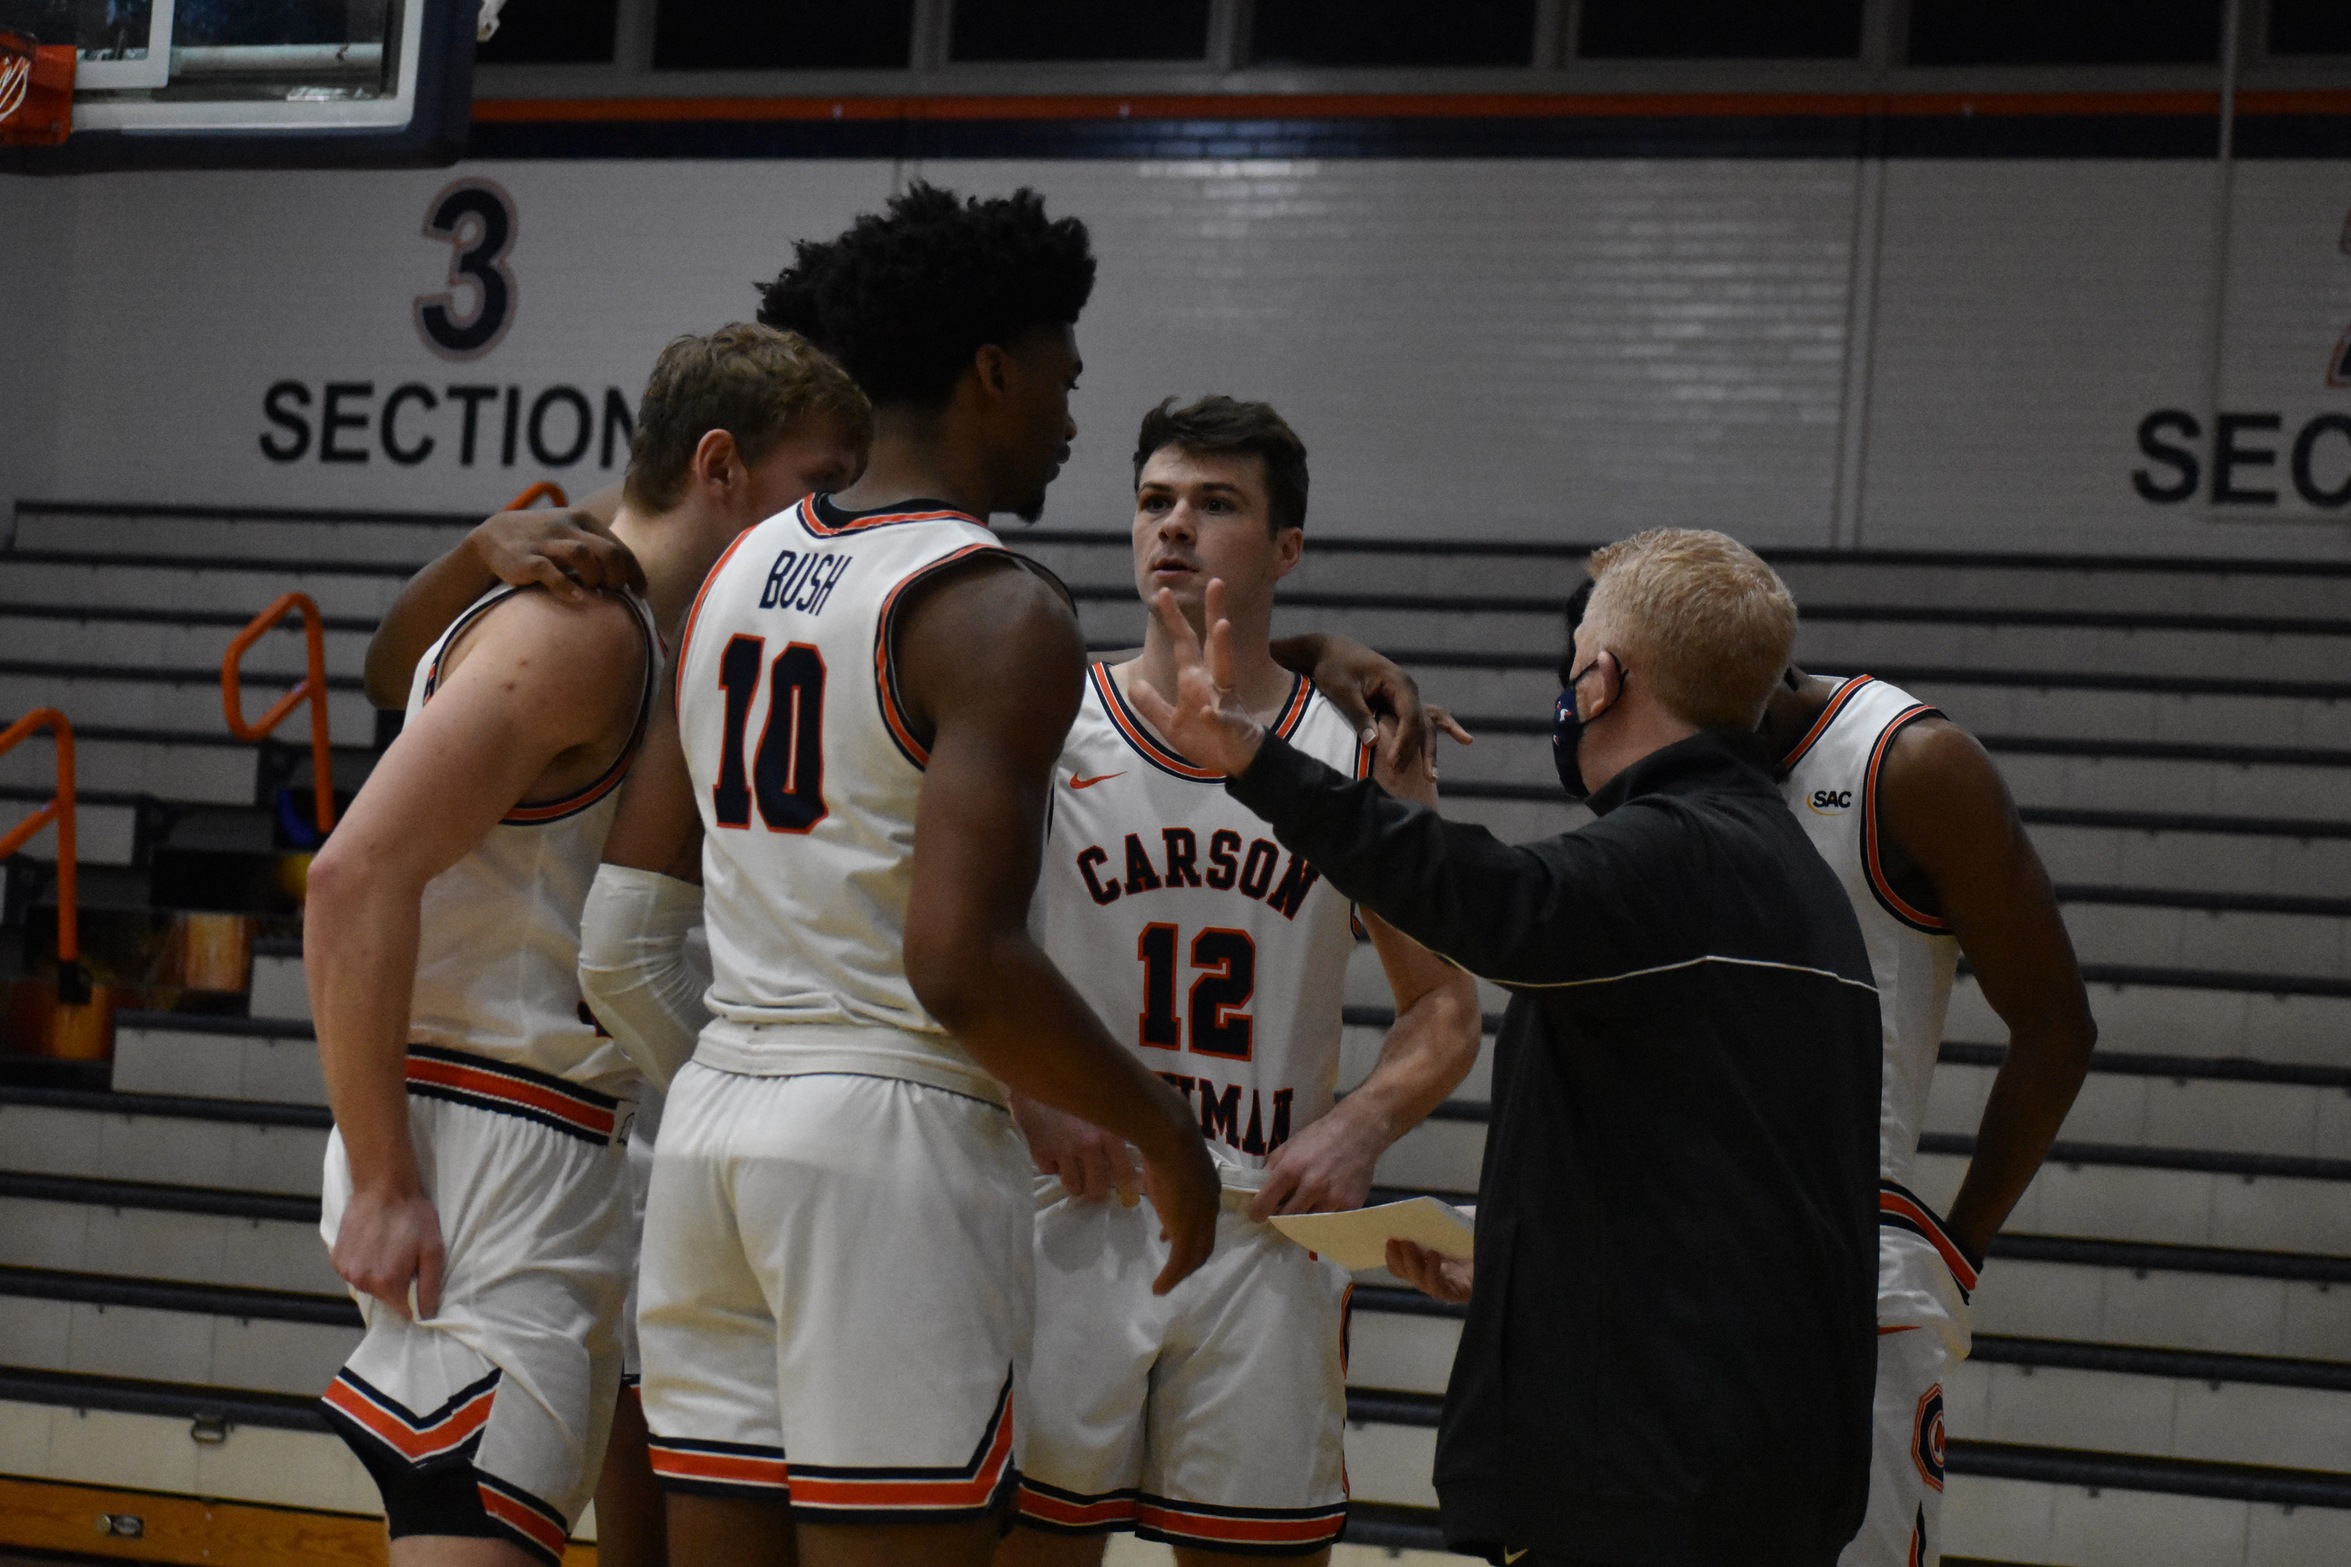 Carson-Newman slotted sixth in final region ranking